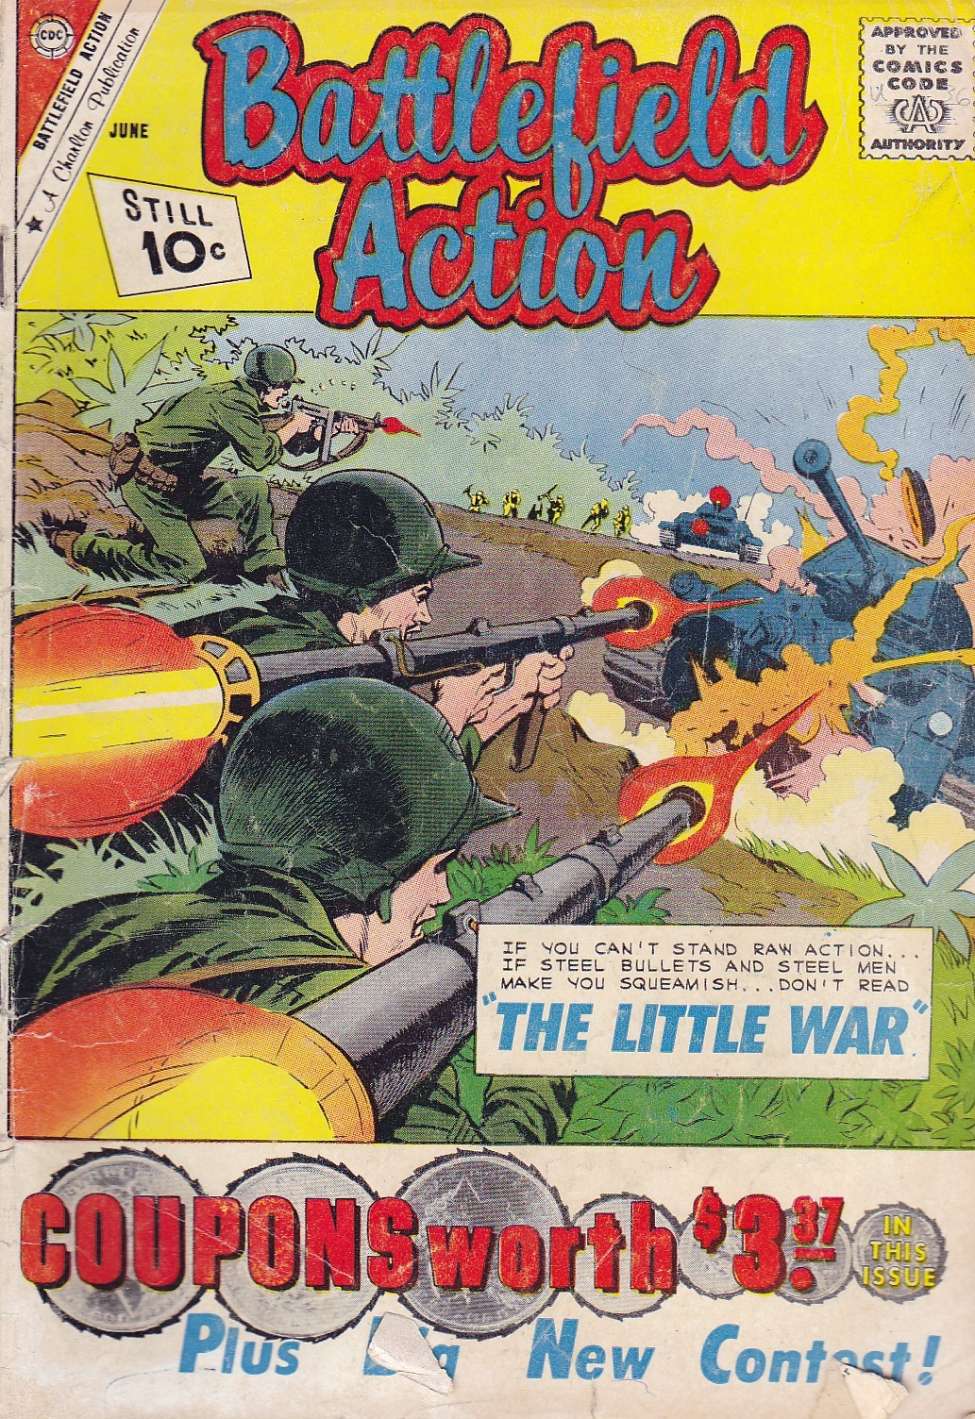 Book Cover For Battlefield Action 36